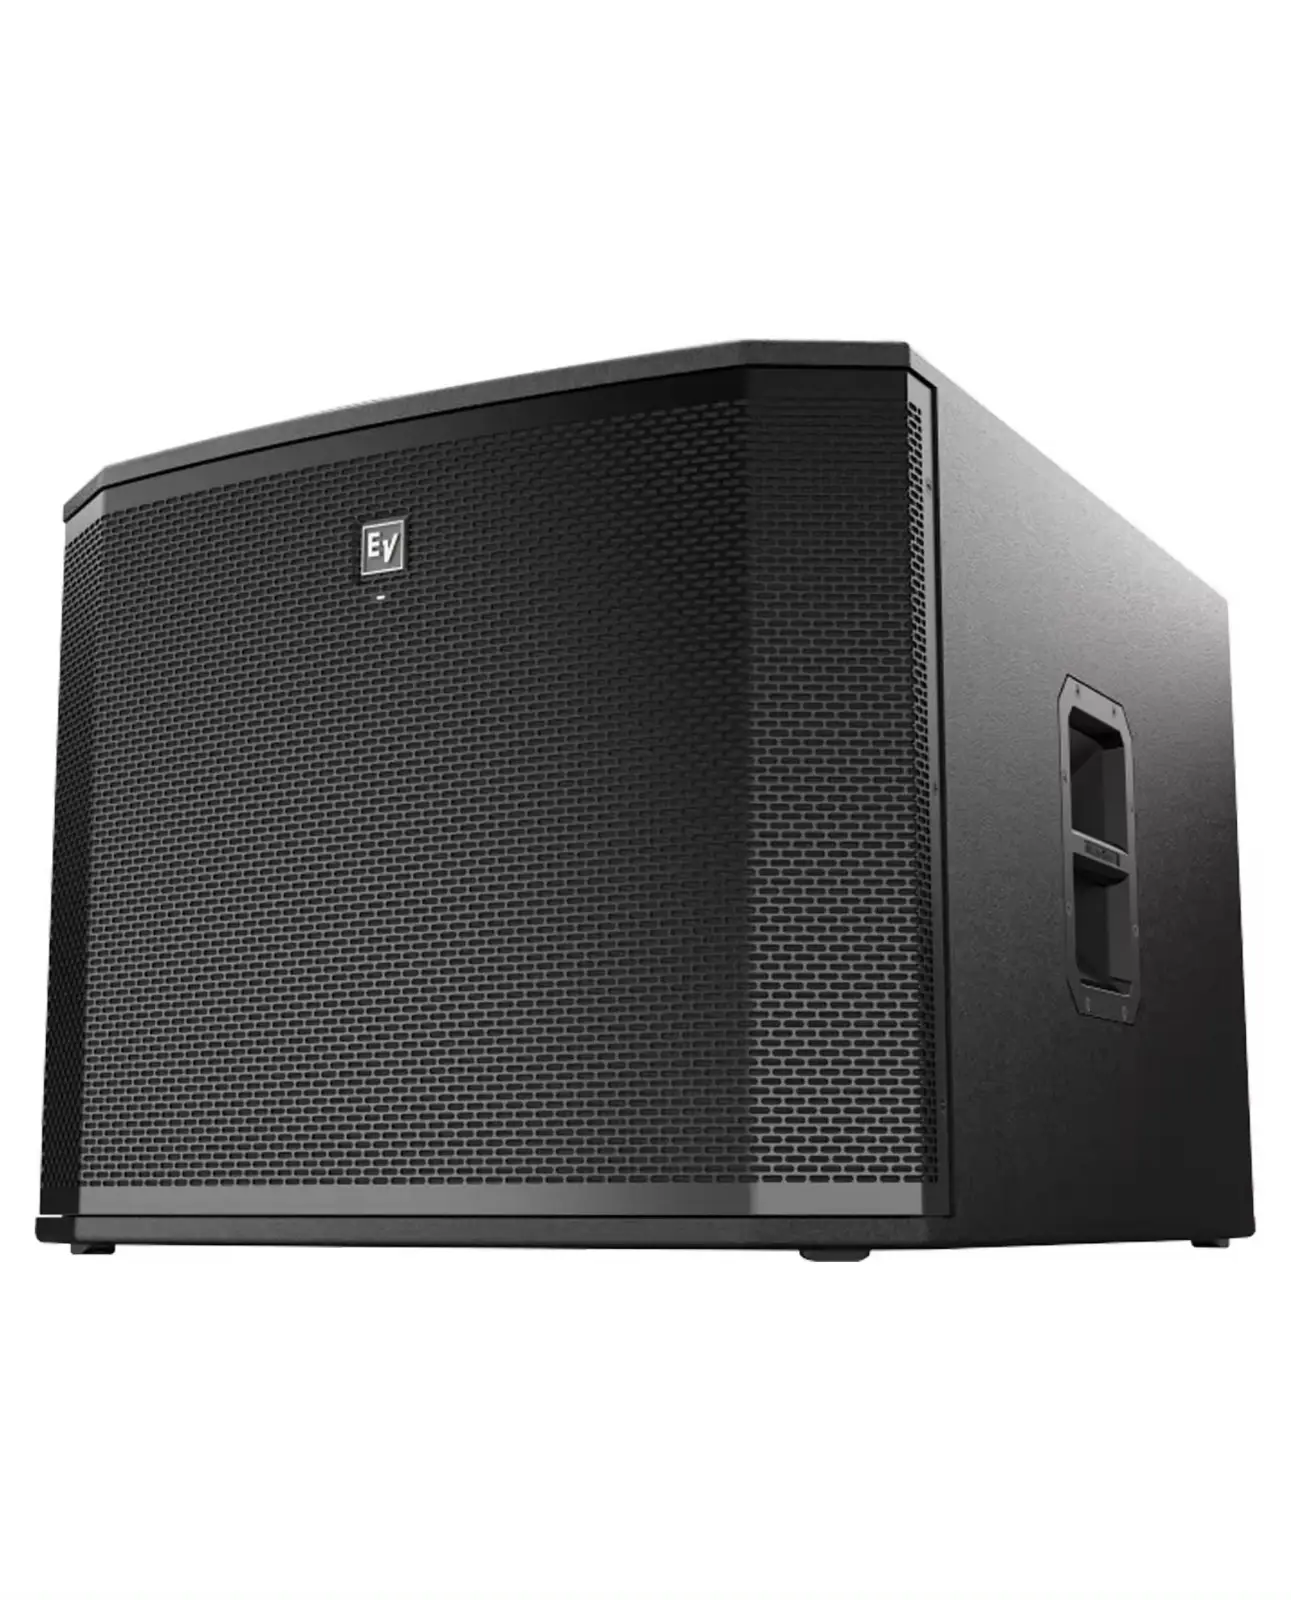 Top Quality ETX-18SP 18 PA Powered Subwoofer 1800W